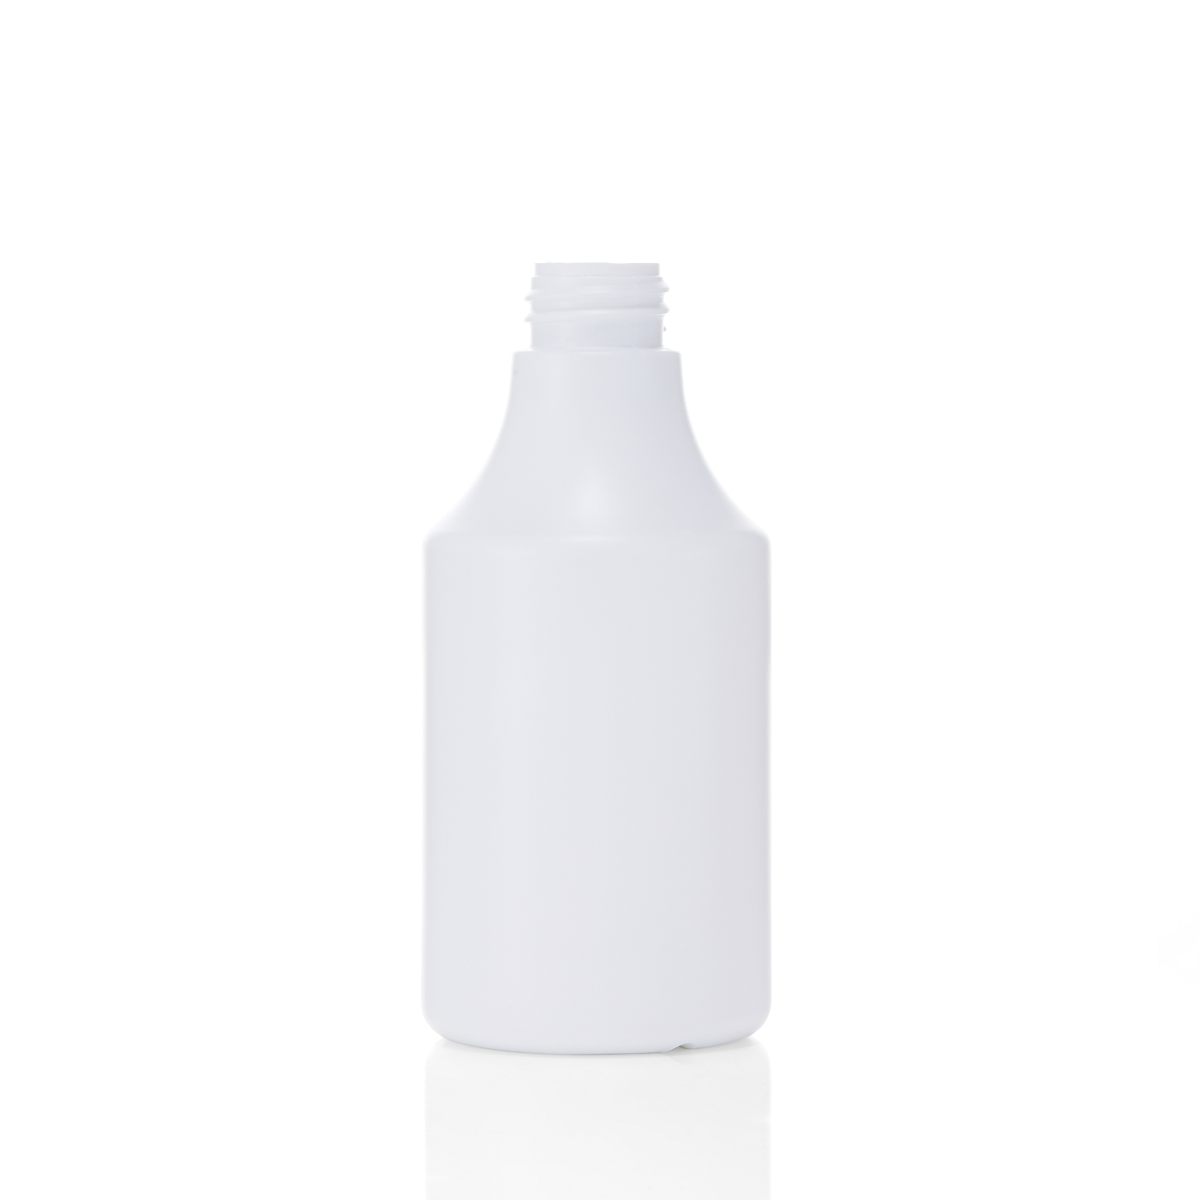 Sanitary Cleaning Bottle